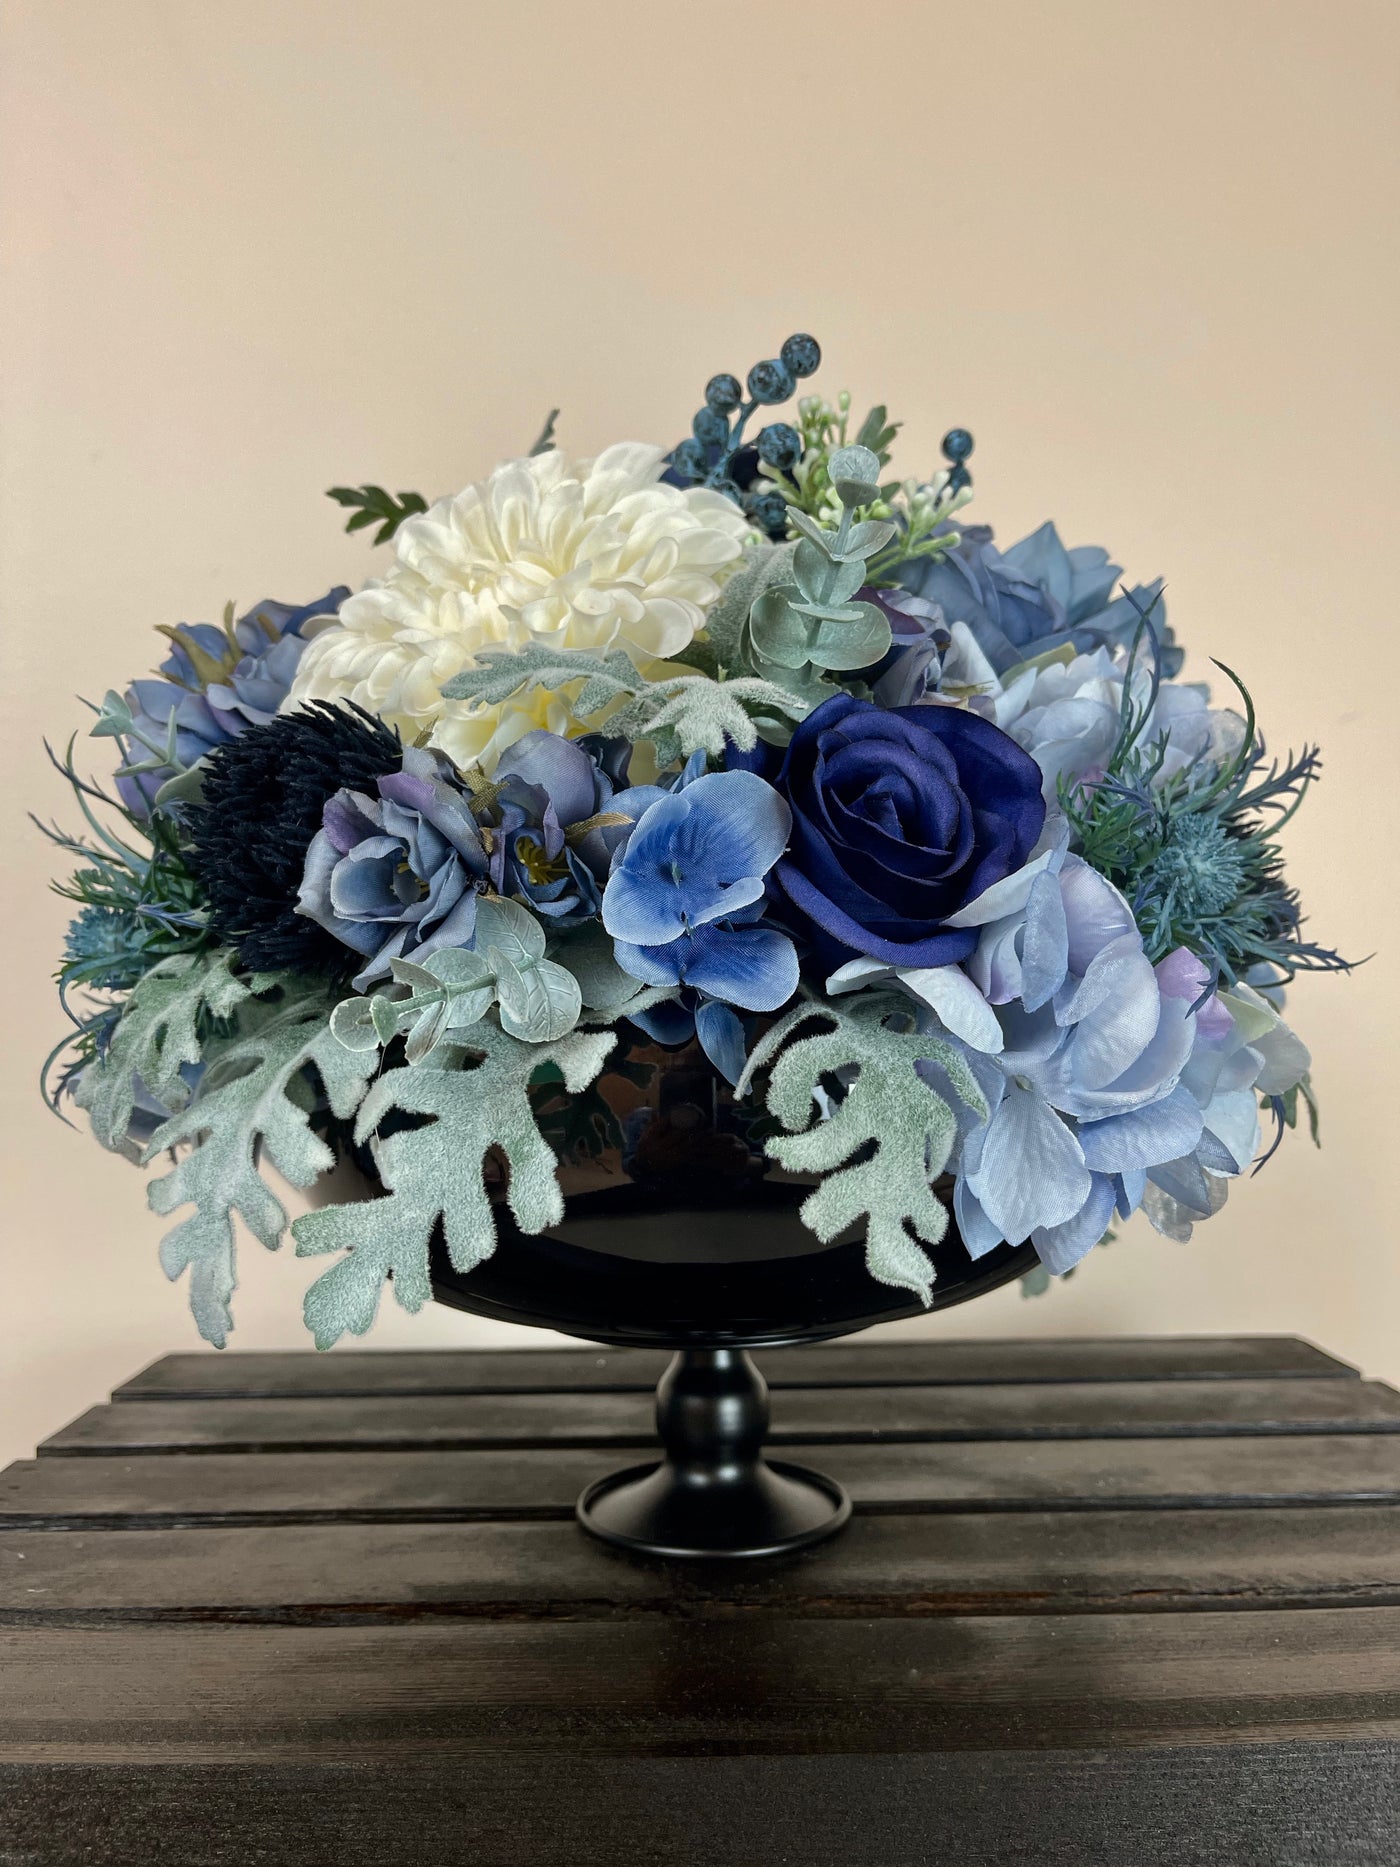 Rent A rose- Various shades of blue roses combined with white dahlias in a black pedestal vase - rent for five days for $108.00